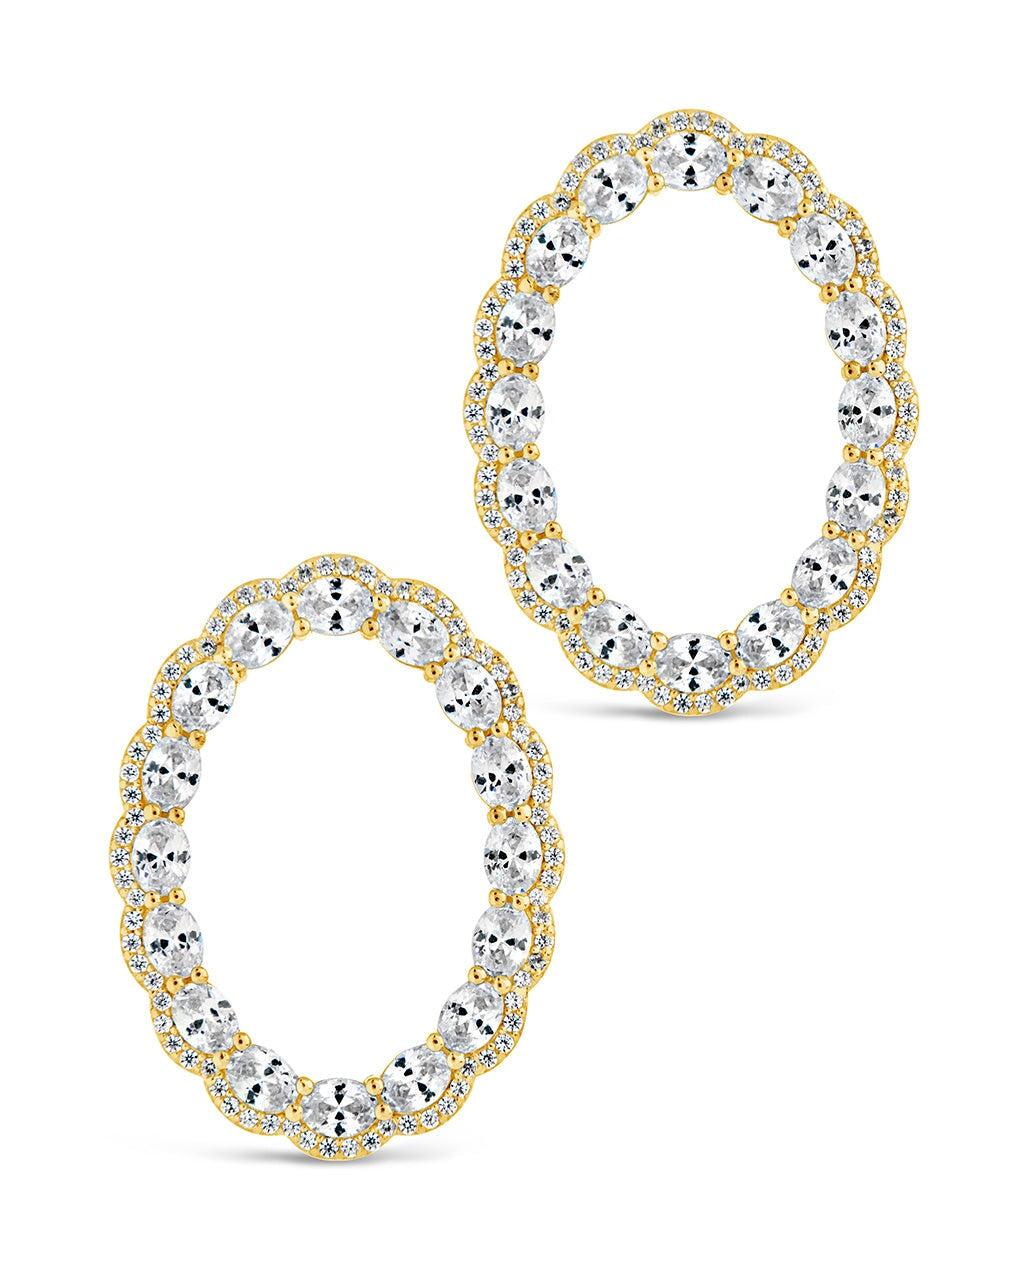 Rosario Statement Studs Earring Sterling Forever 